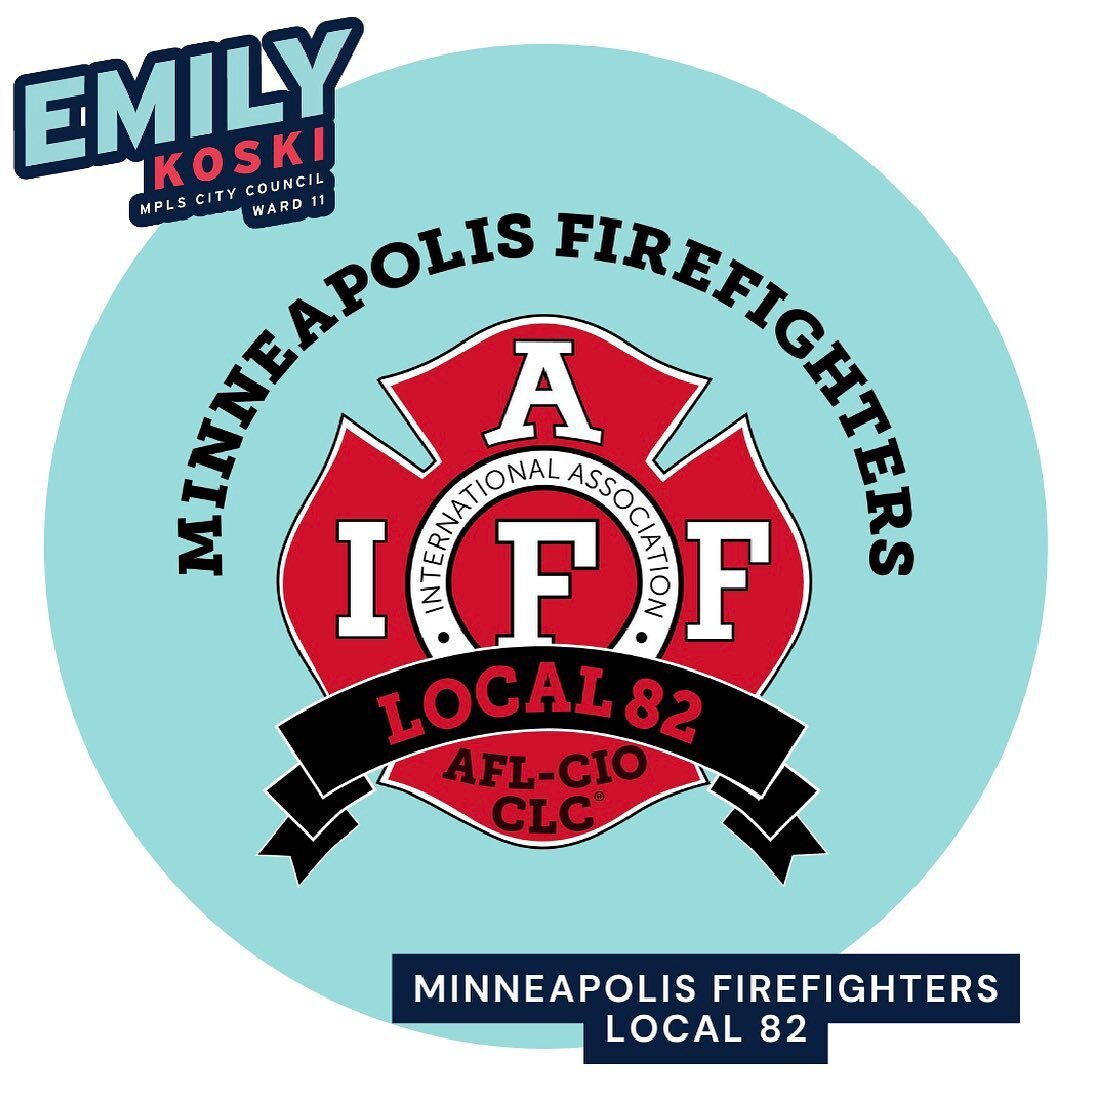 Hey Ward 11! I am thrilled to have the support of our brave local Firefighters who tirelessly protect and serve our community. As Ward 11 Council Member, I am committed to working with our first responders to ensure a safer and stronger community for